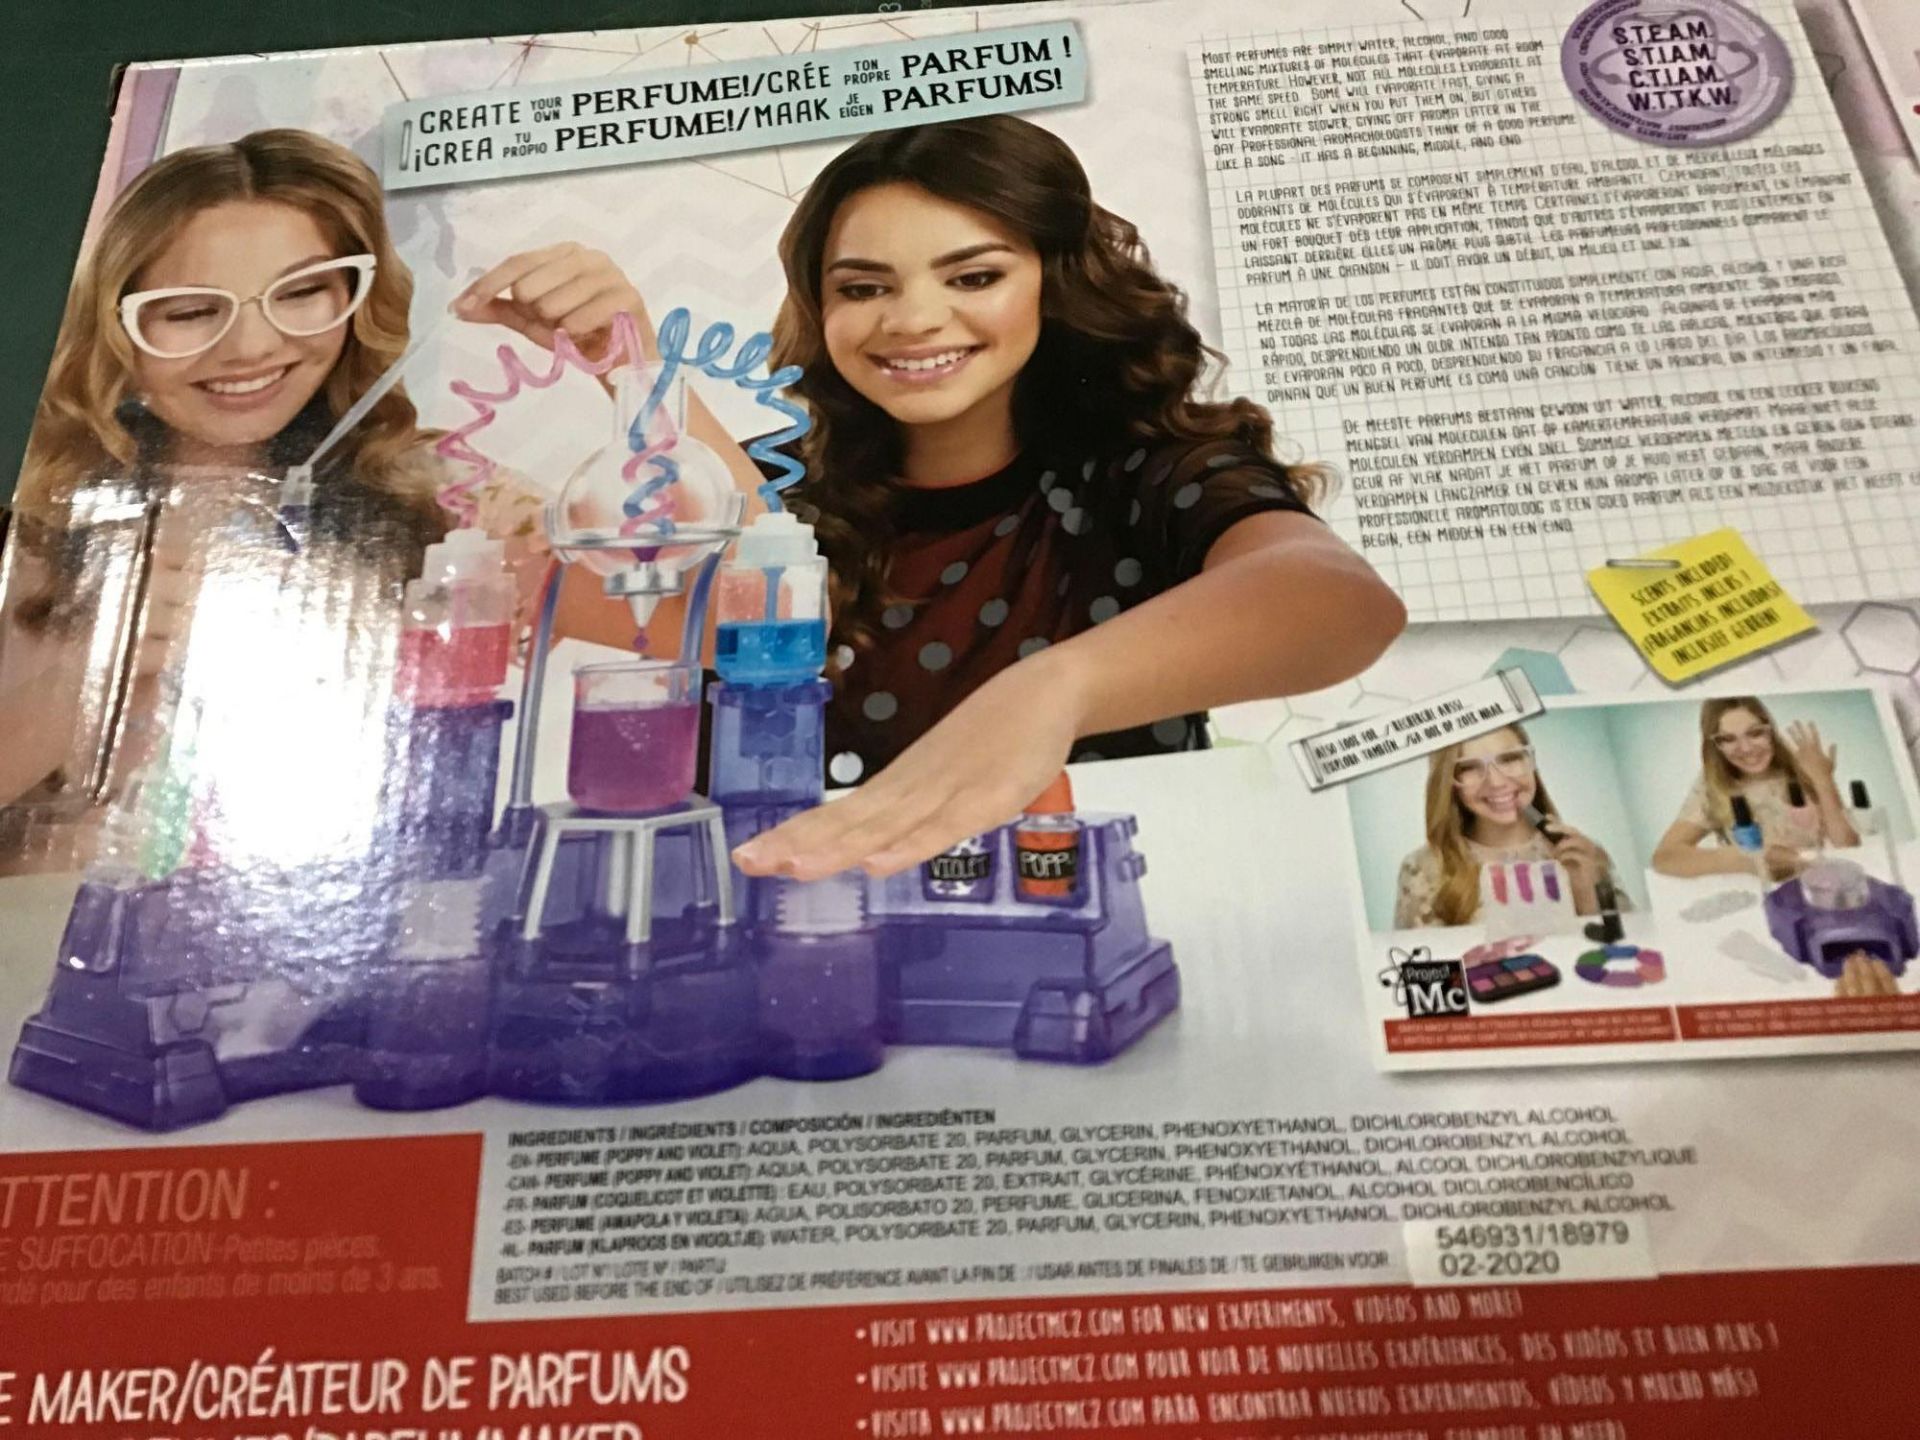 Project Mc2 Perfume Science Kit - £29.99 RRP - Image 3 of 4